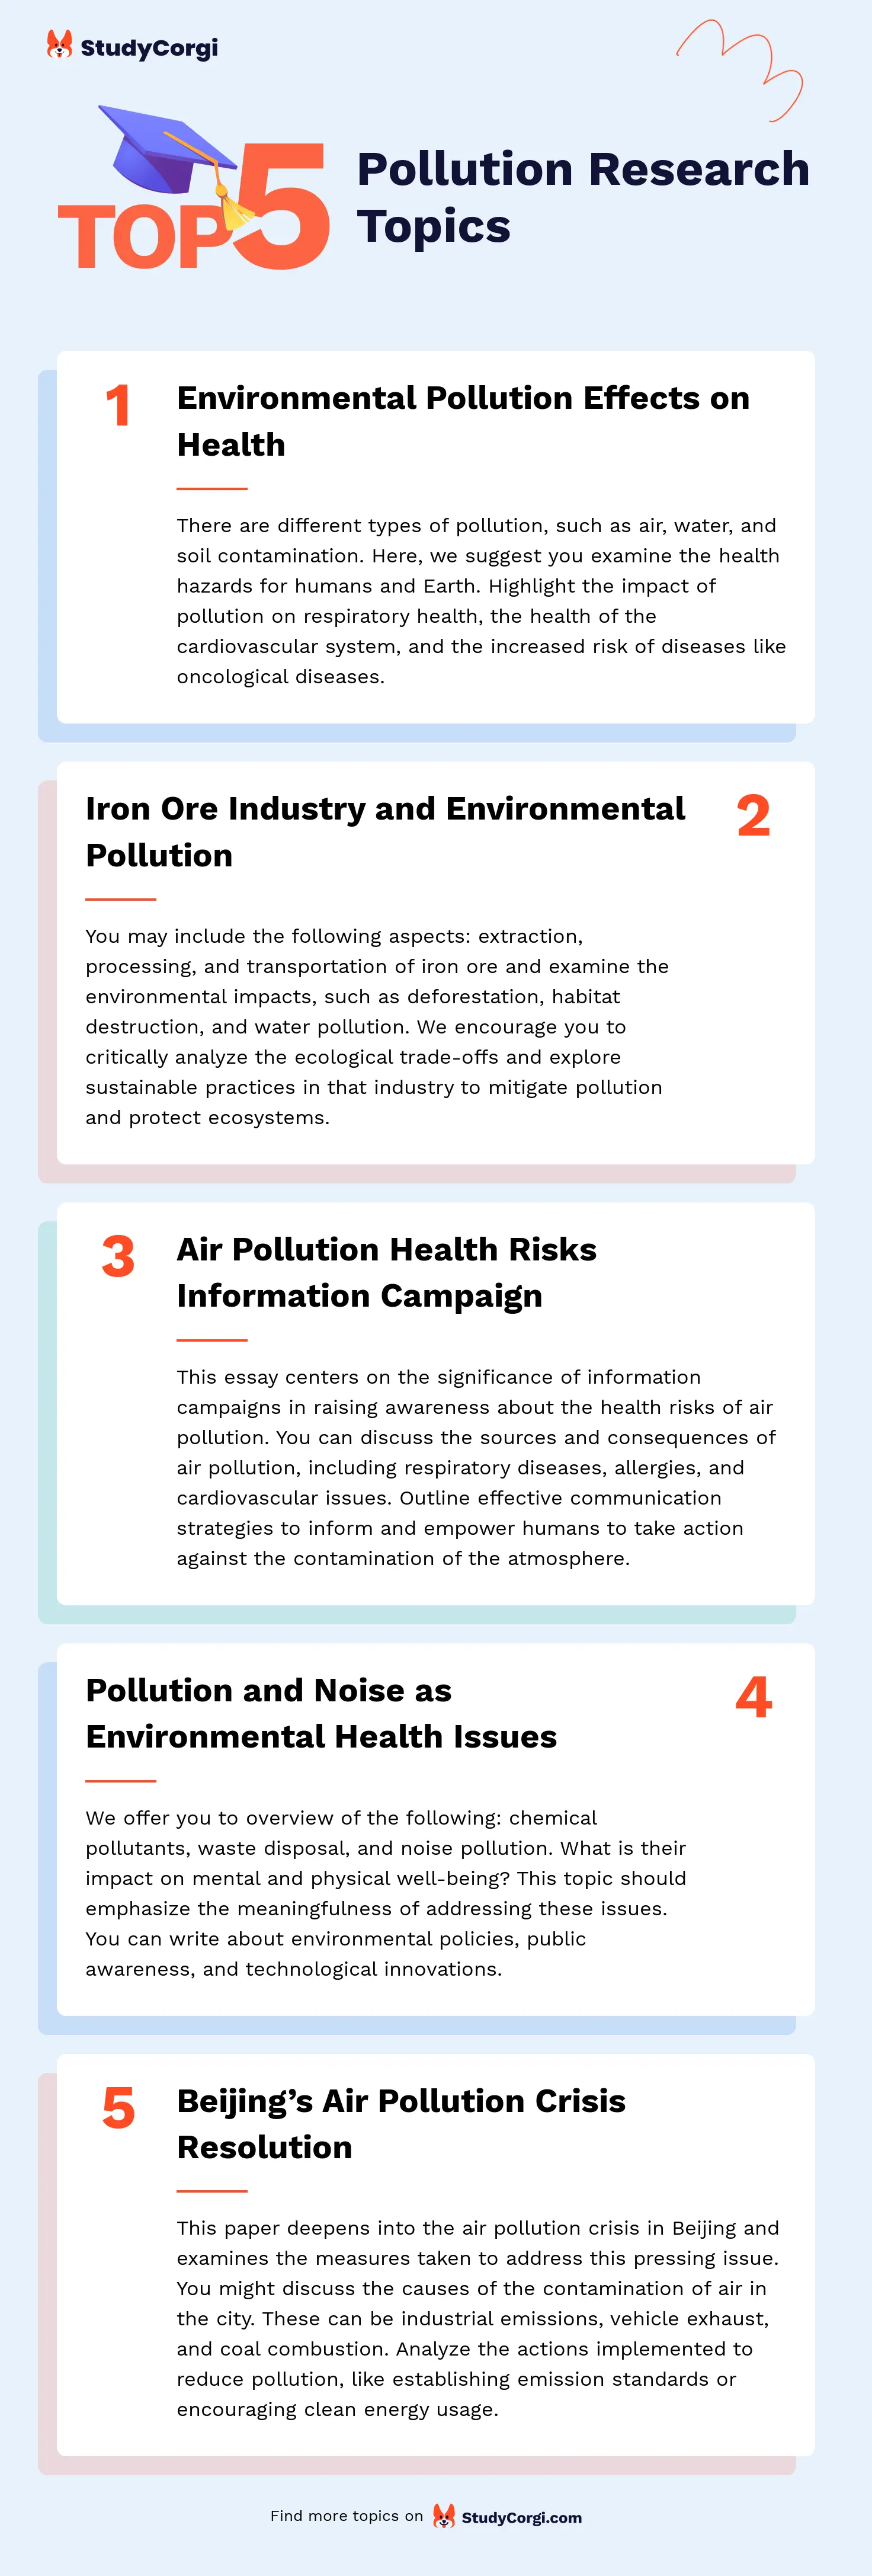 TOP-5 Pollution Research Topics